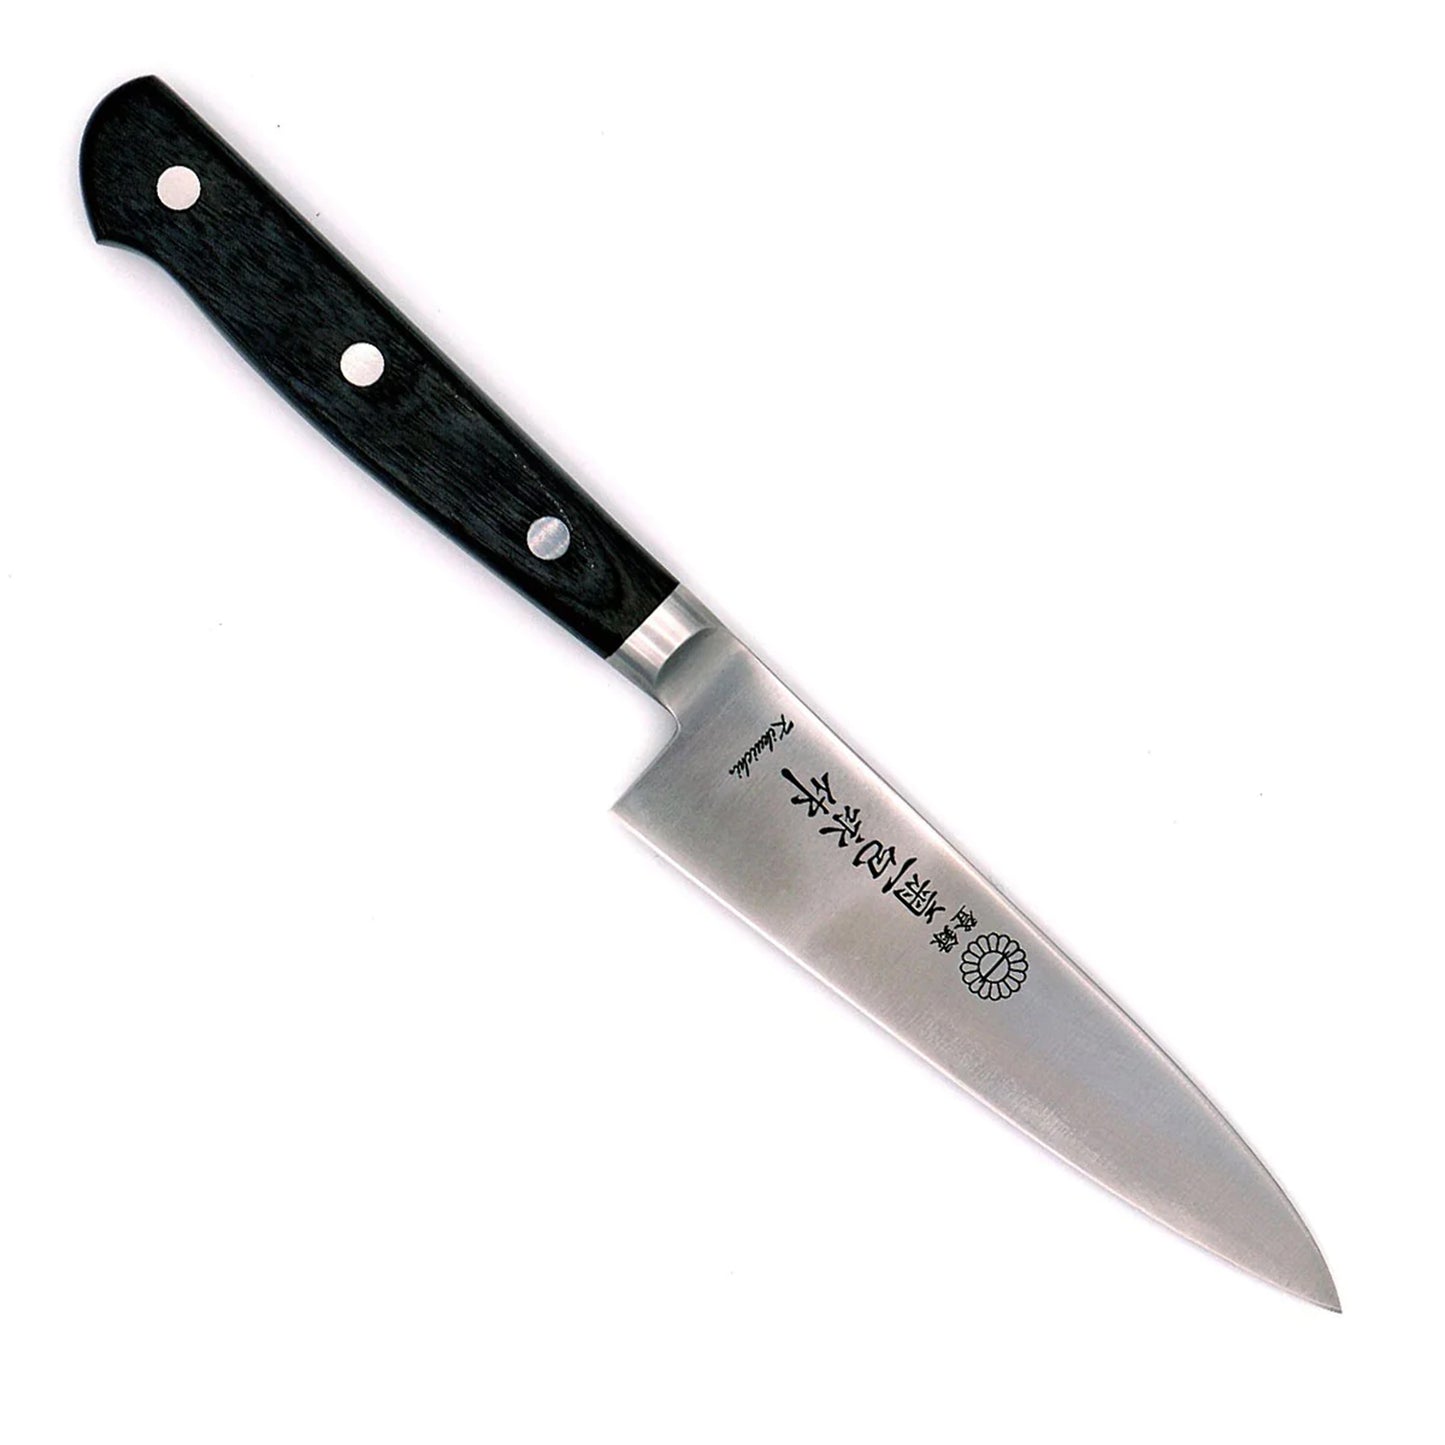 The Kikuichi SEM Series Semi-Stainless Petty Knife is perfect for cooking enthusiasts who appreciate a carbon steel blade edge, while seeking the convenience of stainless-steel maintenance.